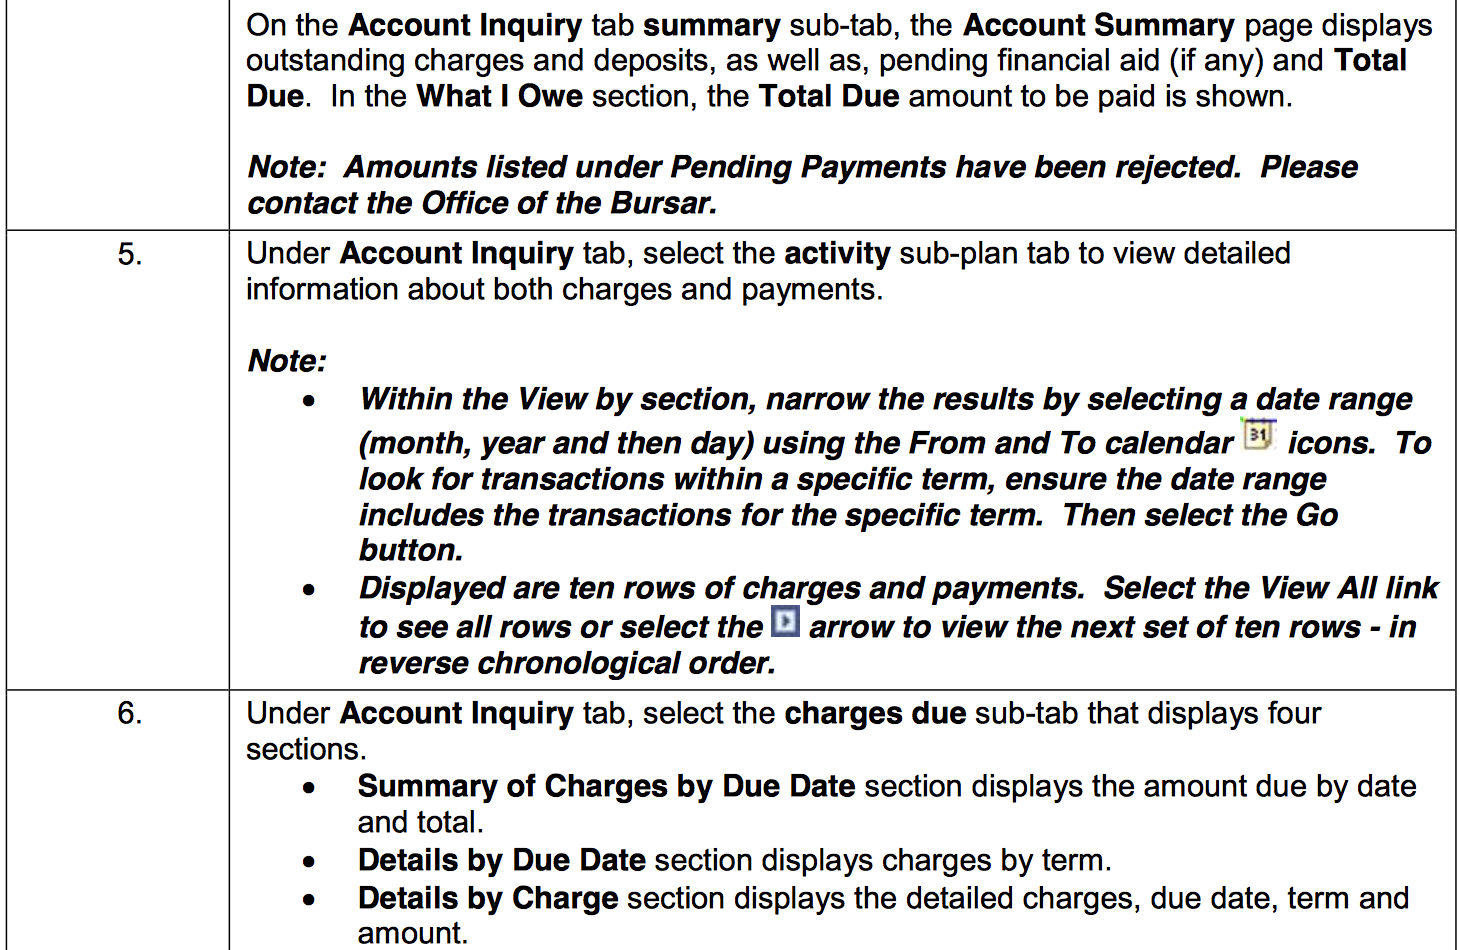 Account Inquiry - Bills, Payments and Financial Aid 2